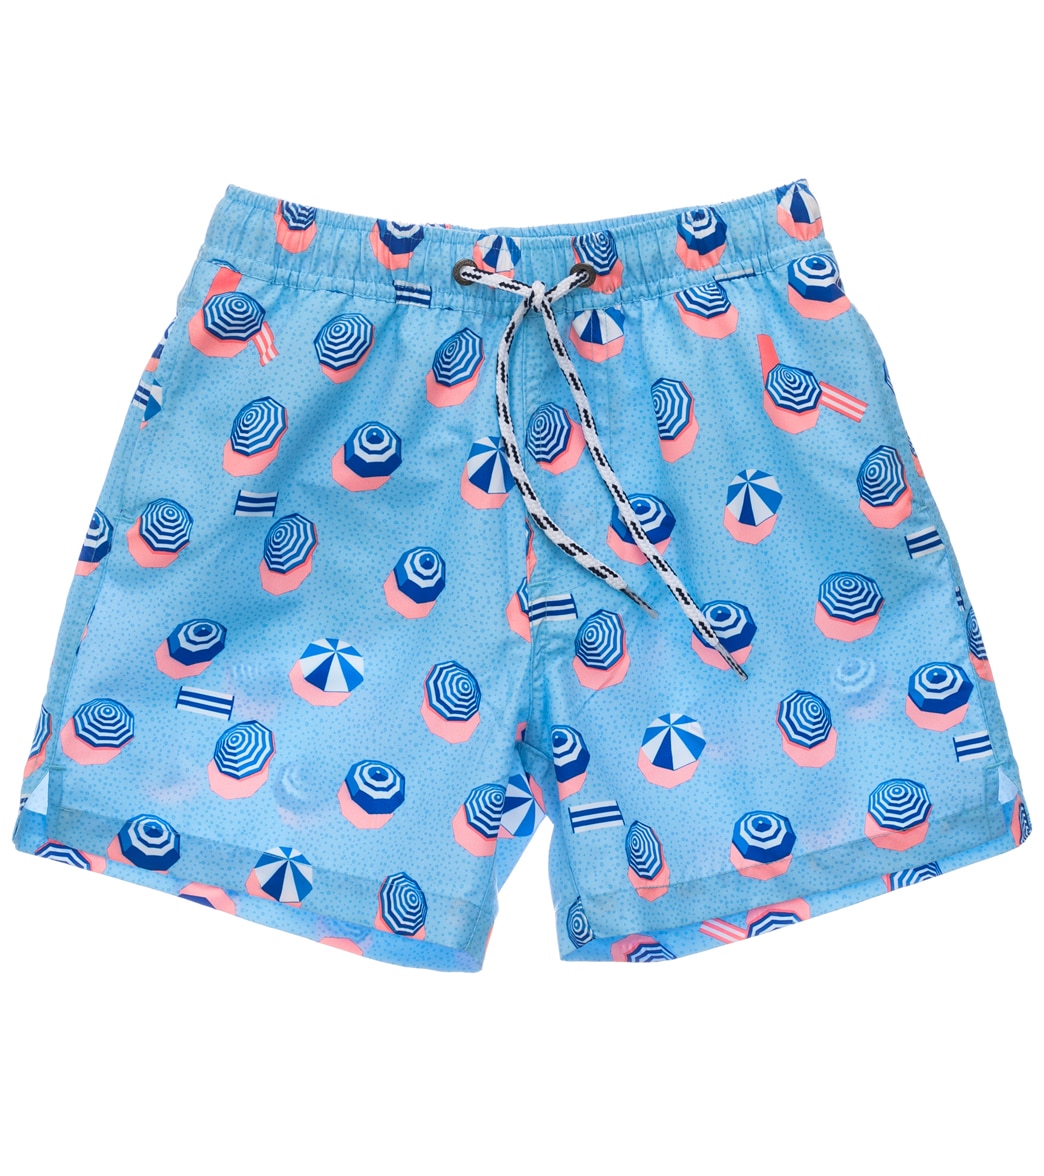 Snapper Rock Boys' French Riviera Volley Swim Trunk Toddler/Little/Big Kid - Blue 12 Polyester - Swimoutlet.com